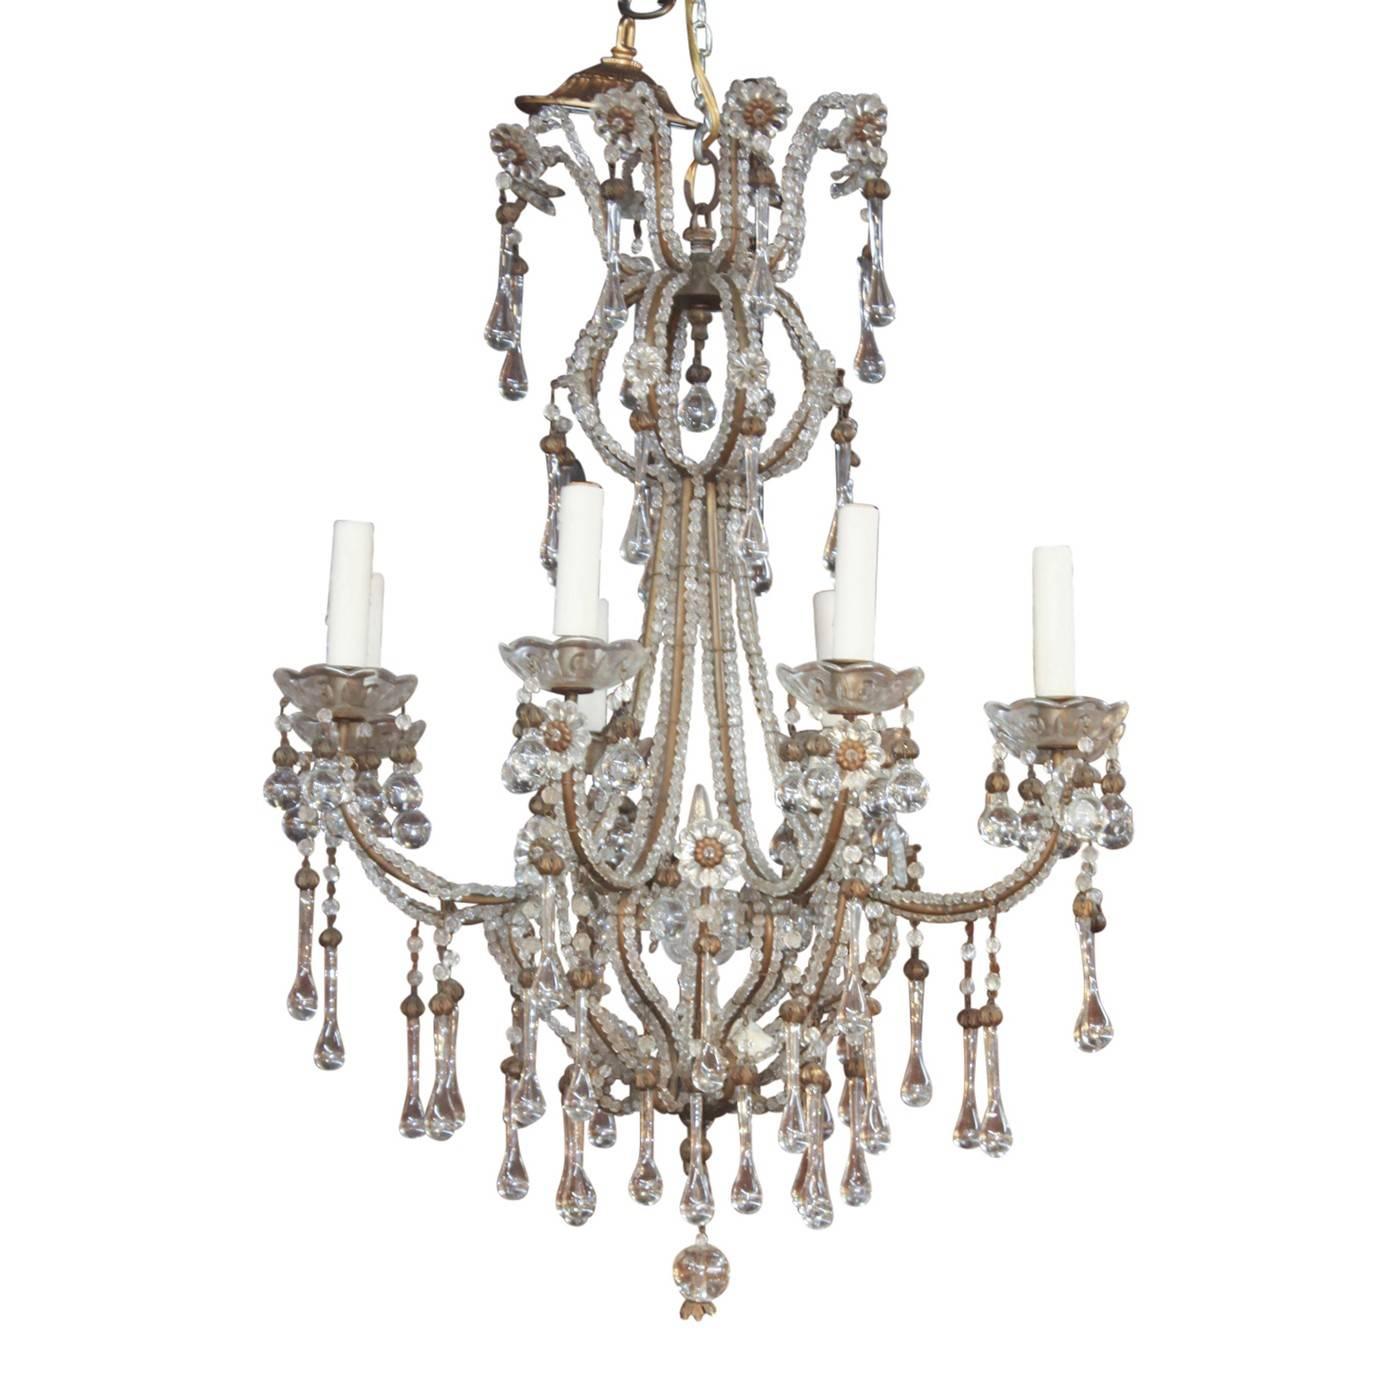 Gorgeous Italian crystal chandelier decorated overall with small cut crystal beads and accented with crystal rosettes. The gracefully curved arms end in scalloped candle cups. The lower most adorned with long tea-shaped crystal drops.